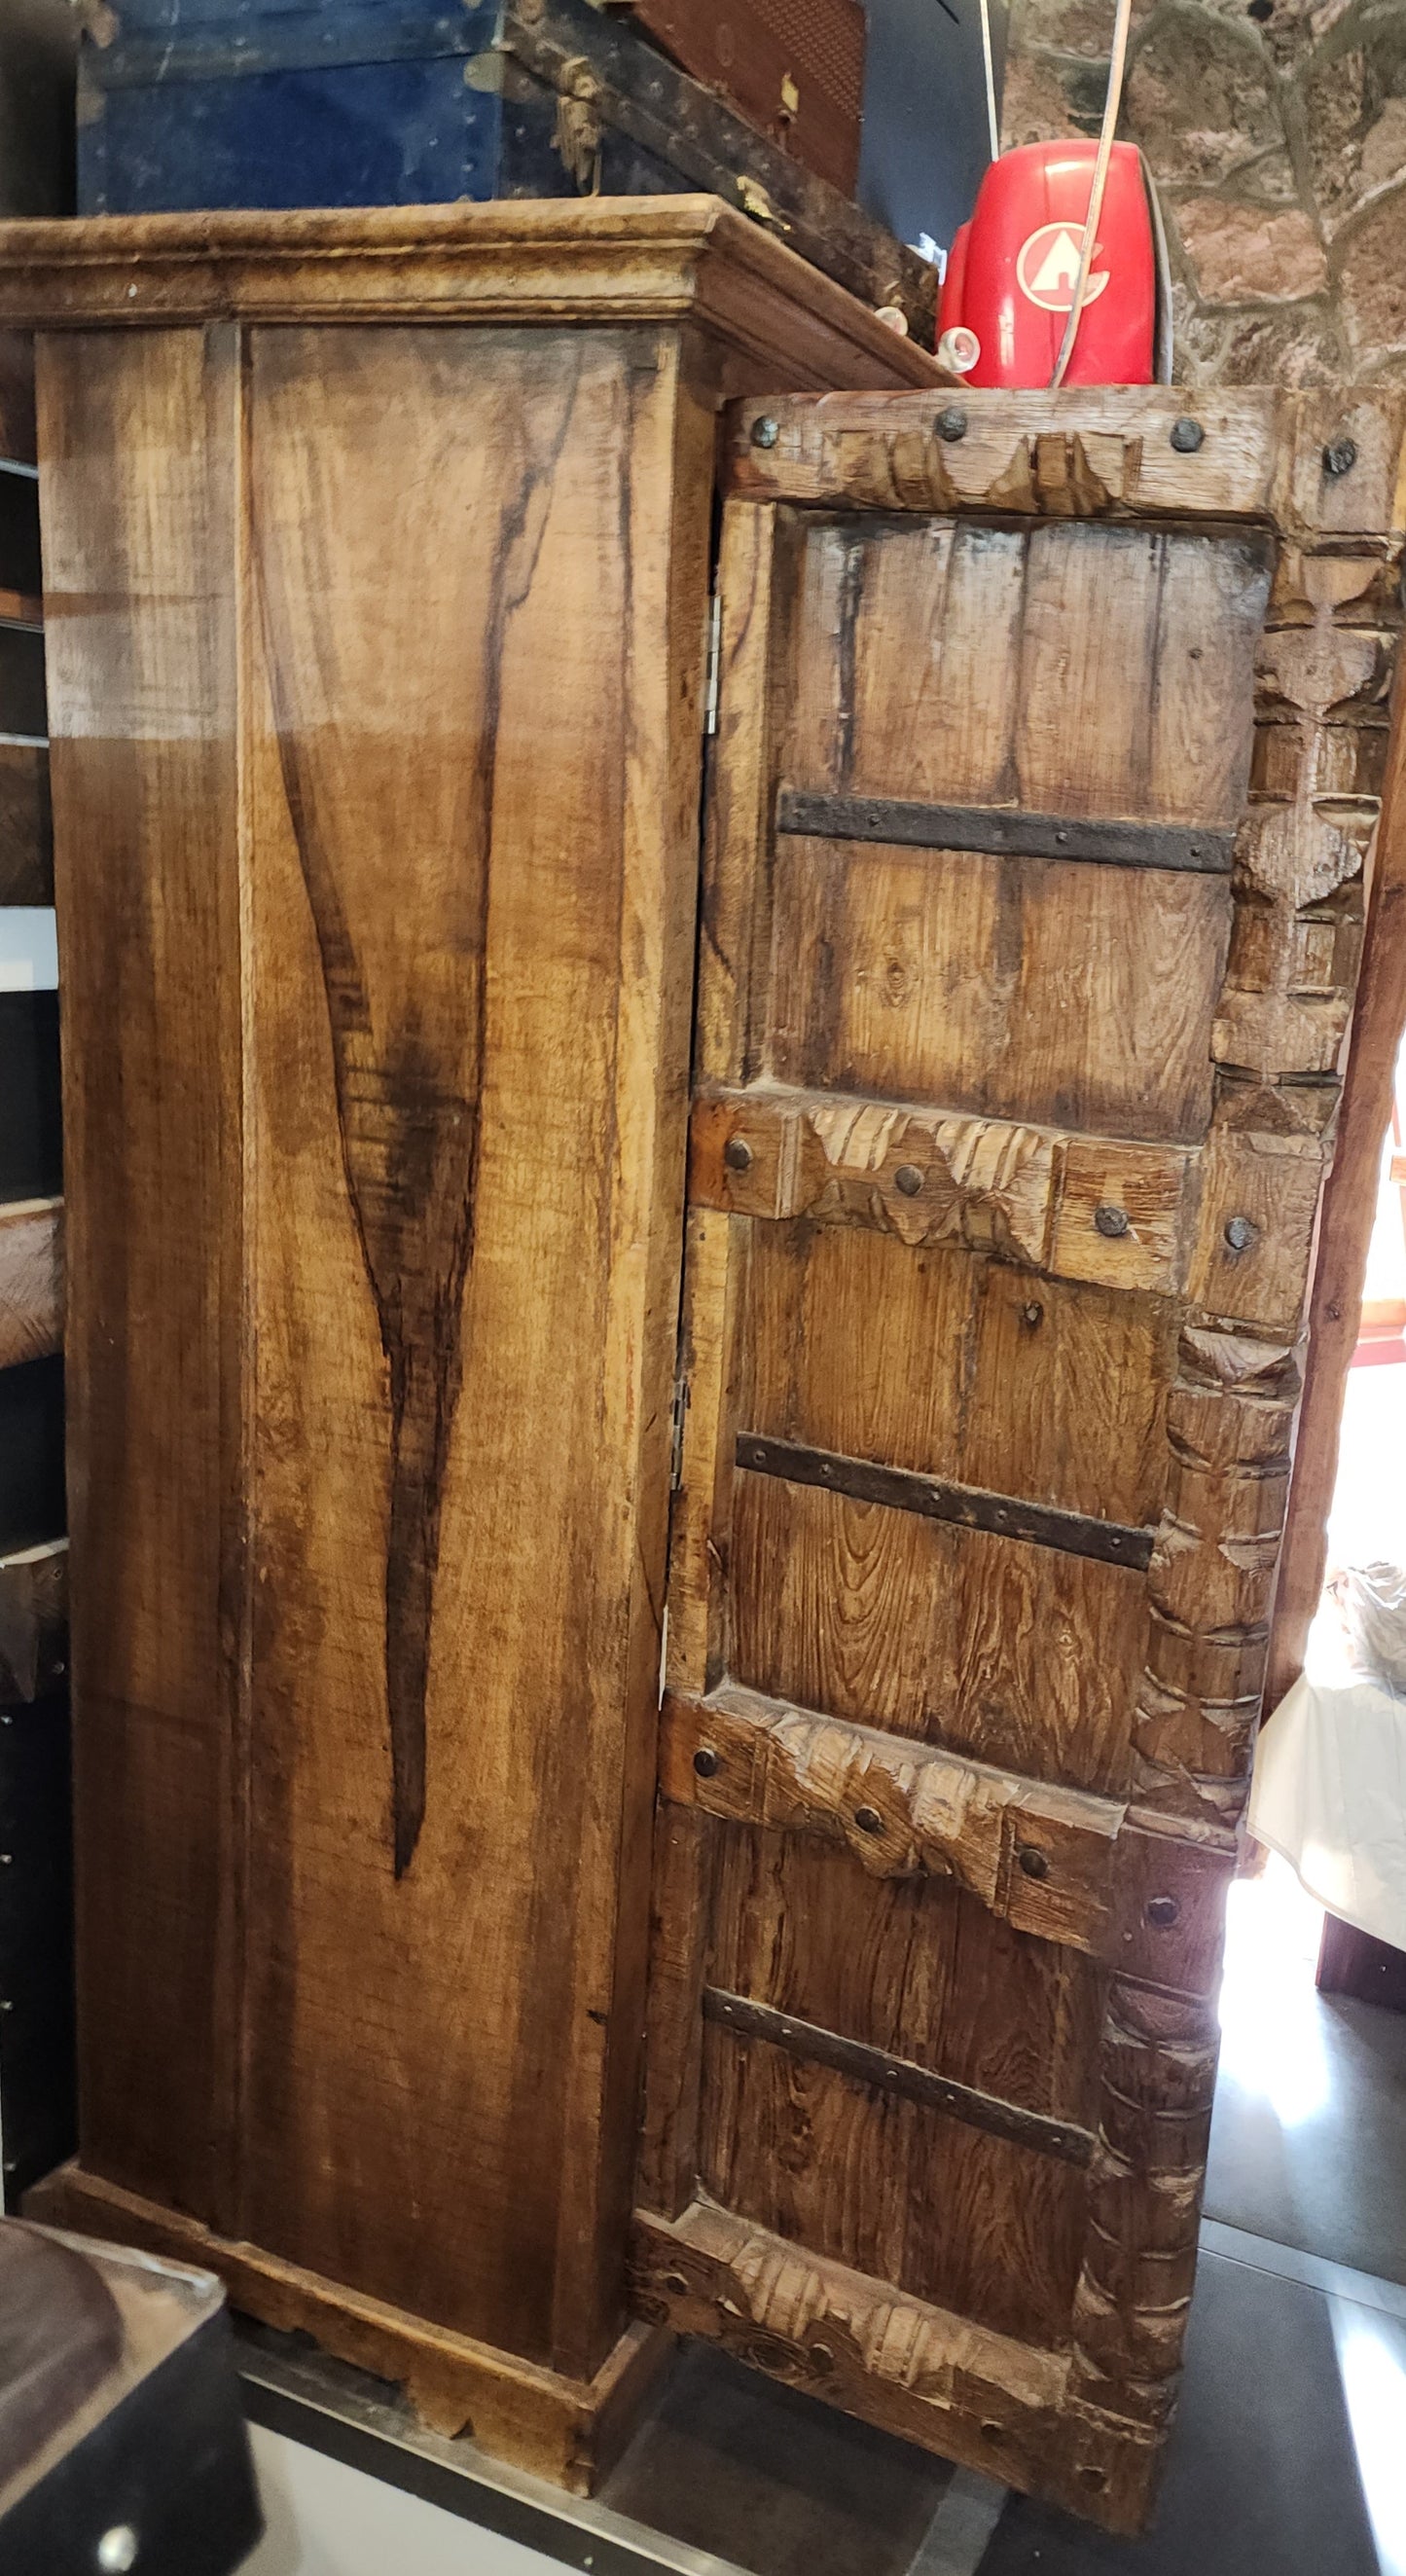 Indian 19th Century Gujarat Teak Armoire with Iron Braces and Carved Columns